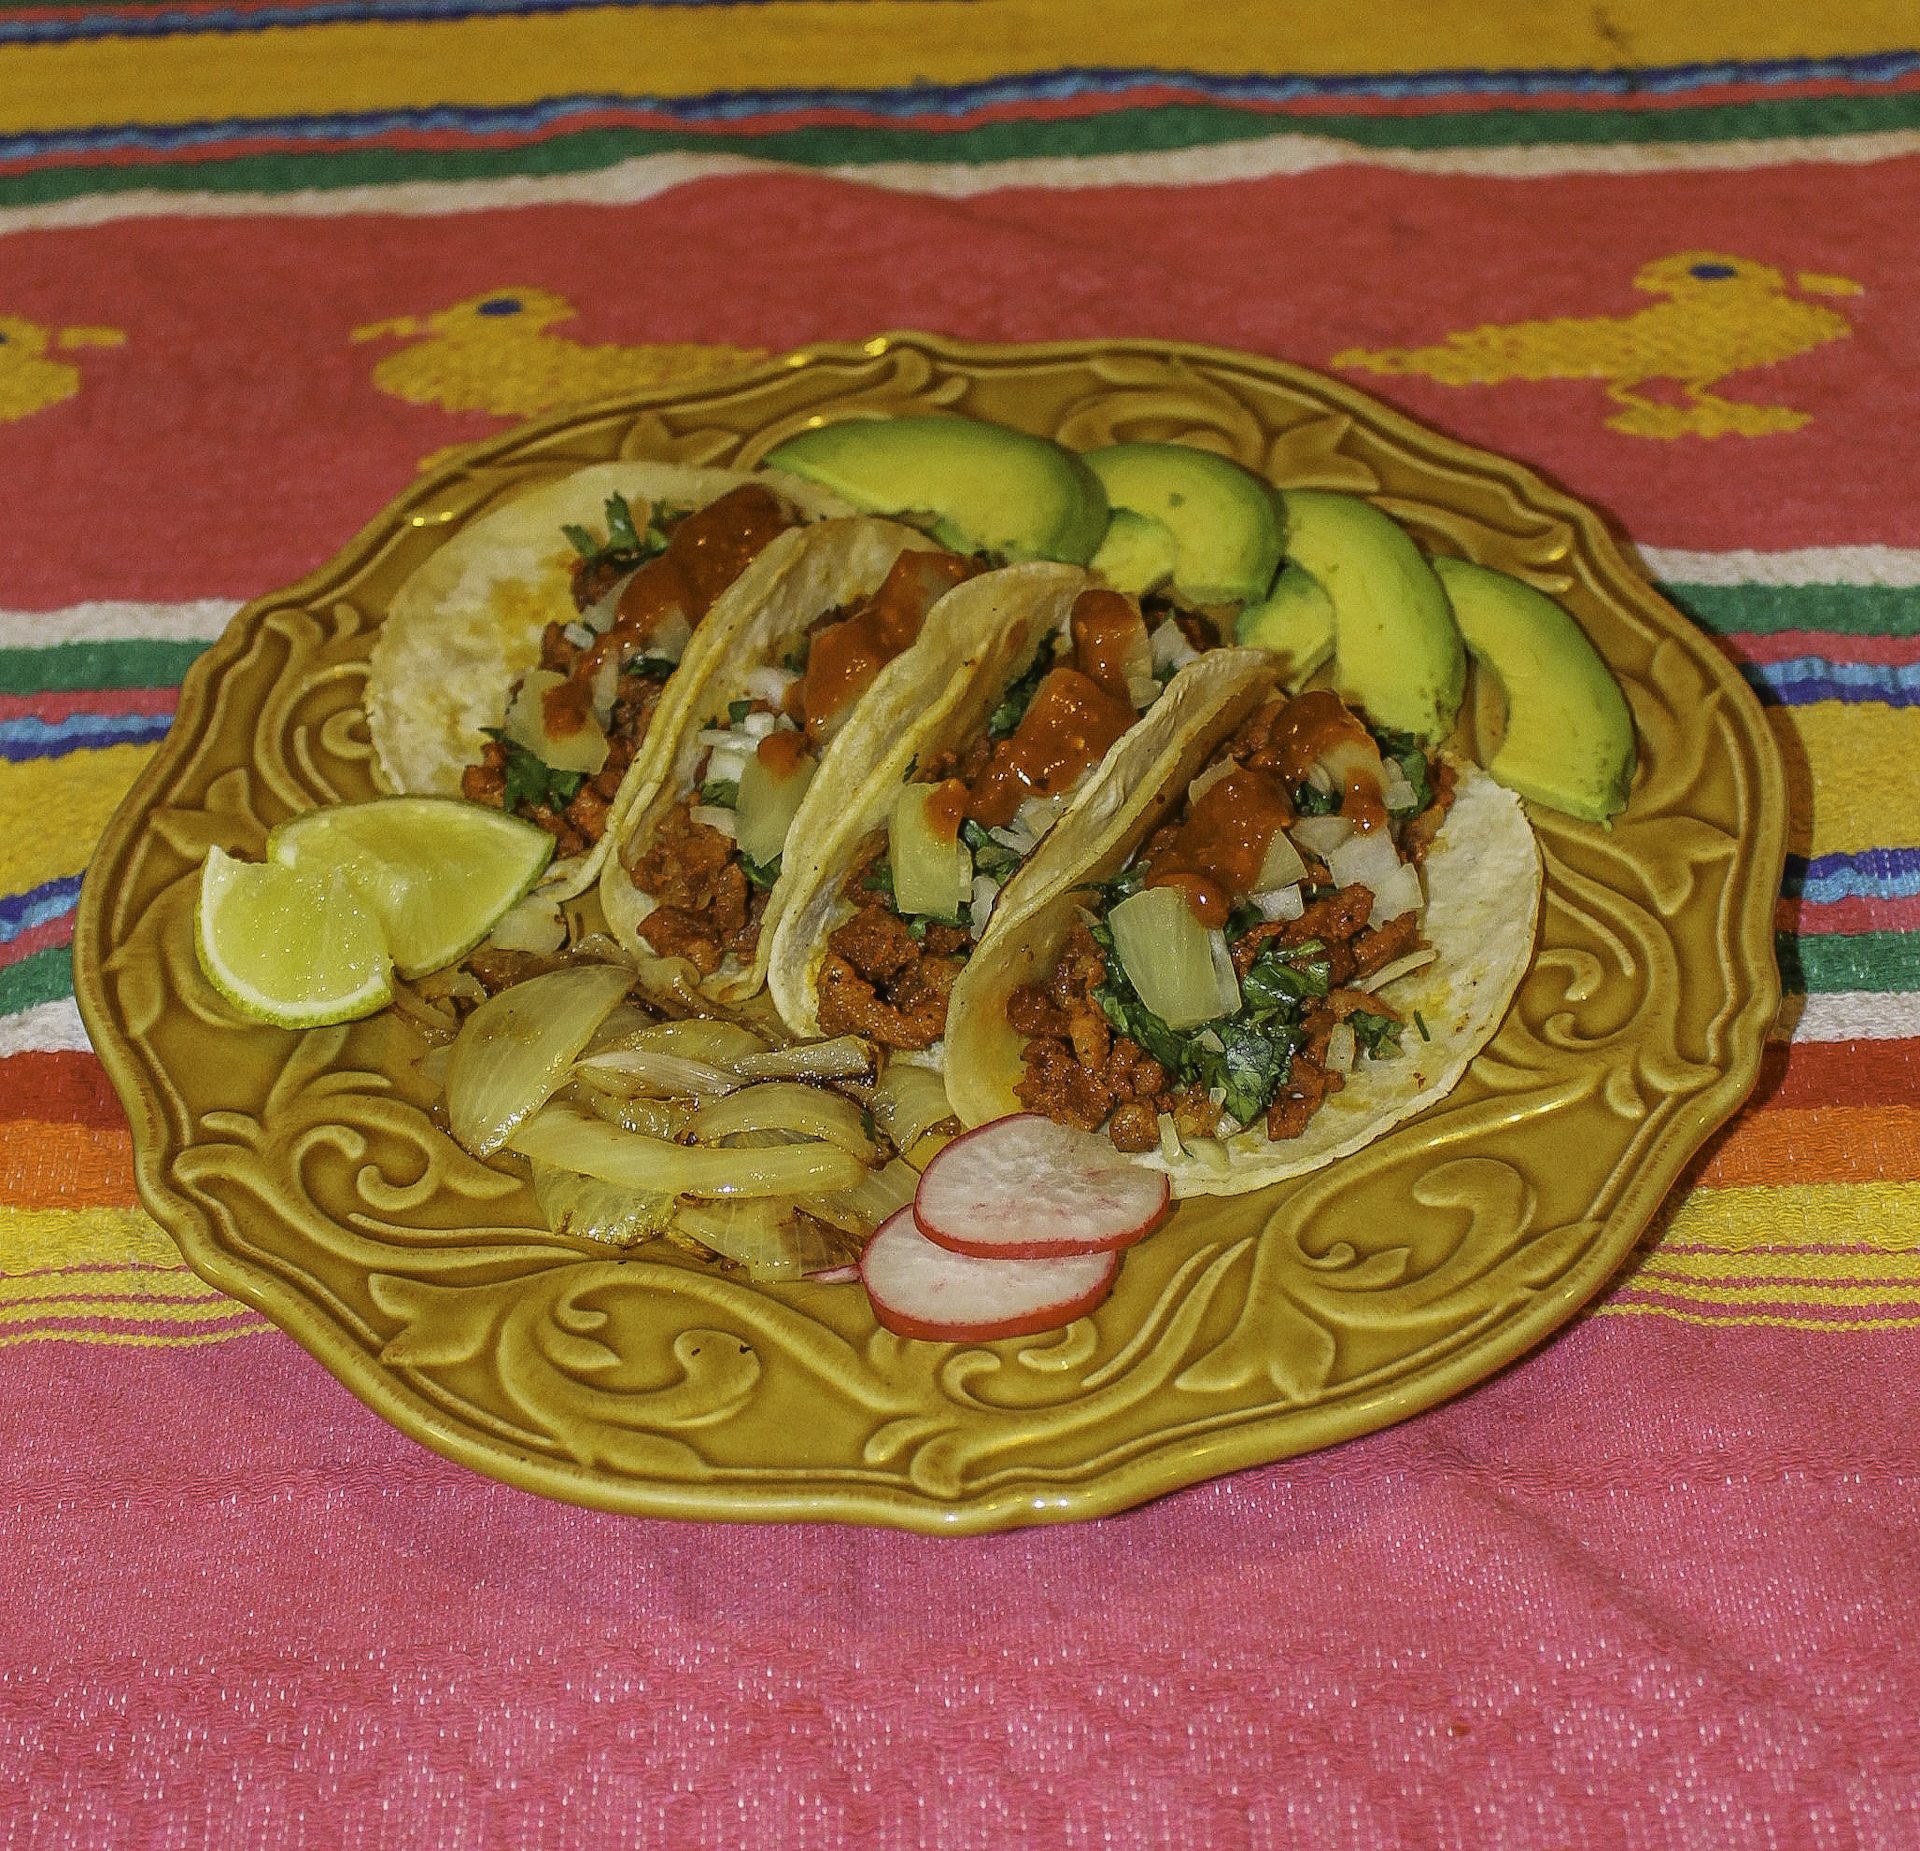 4 pork pastor tacos with limes, grilled onions, and radishes